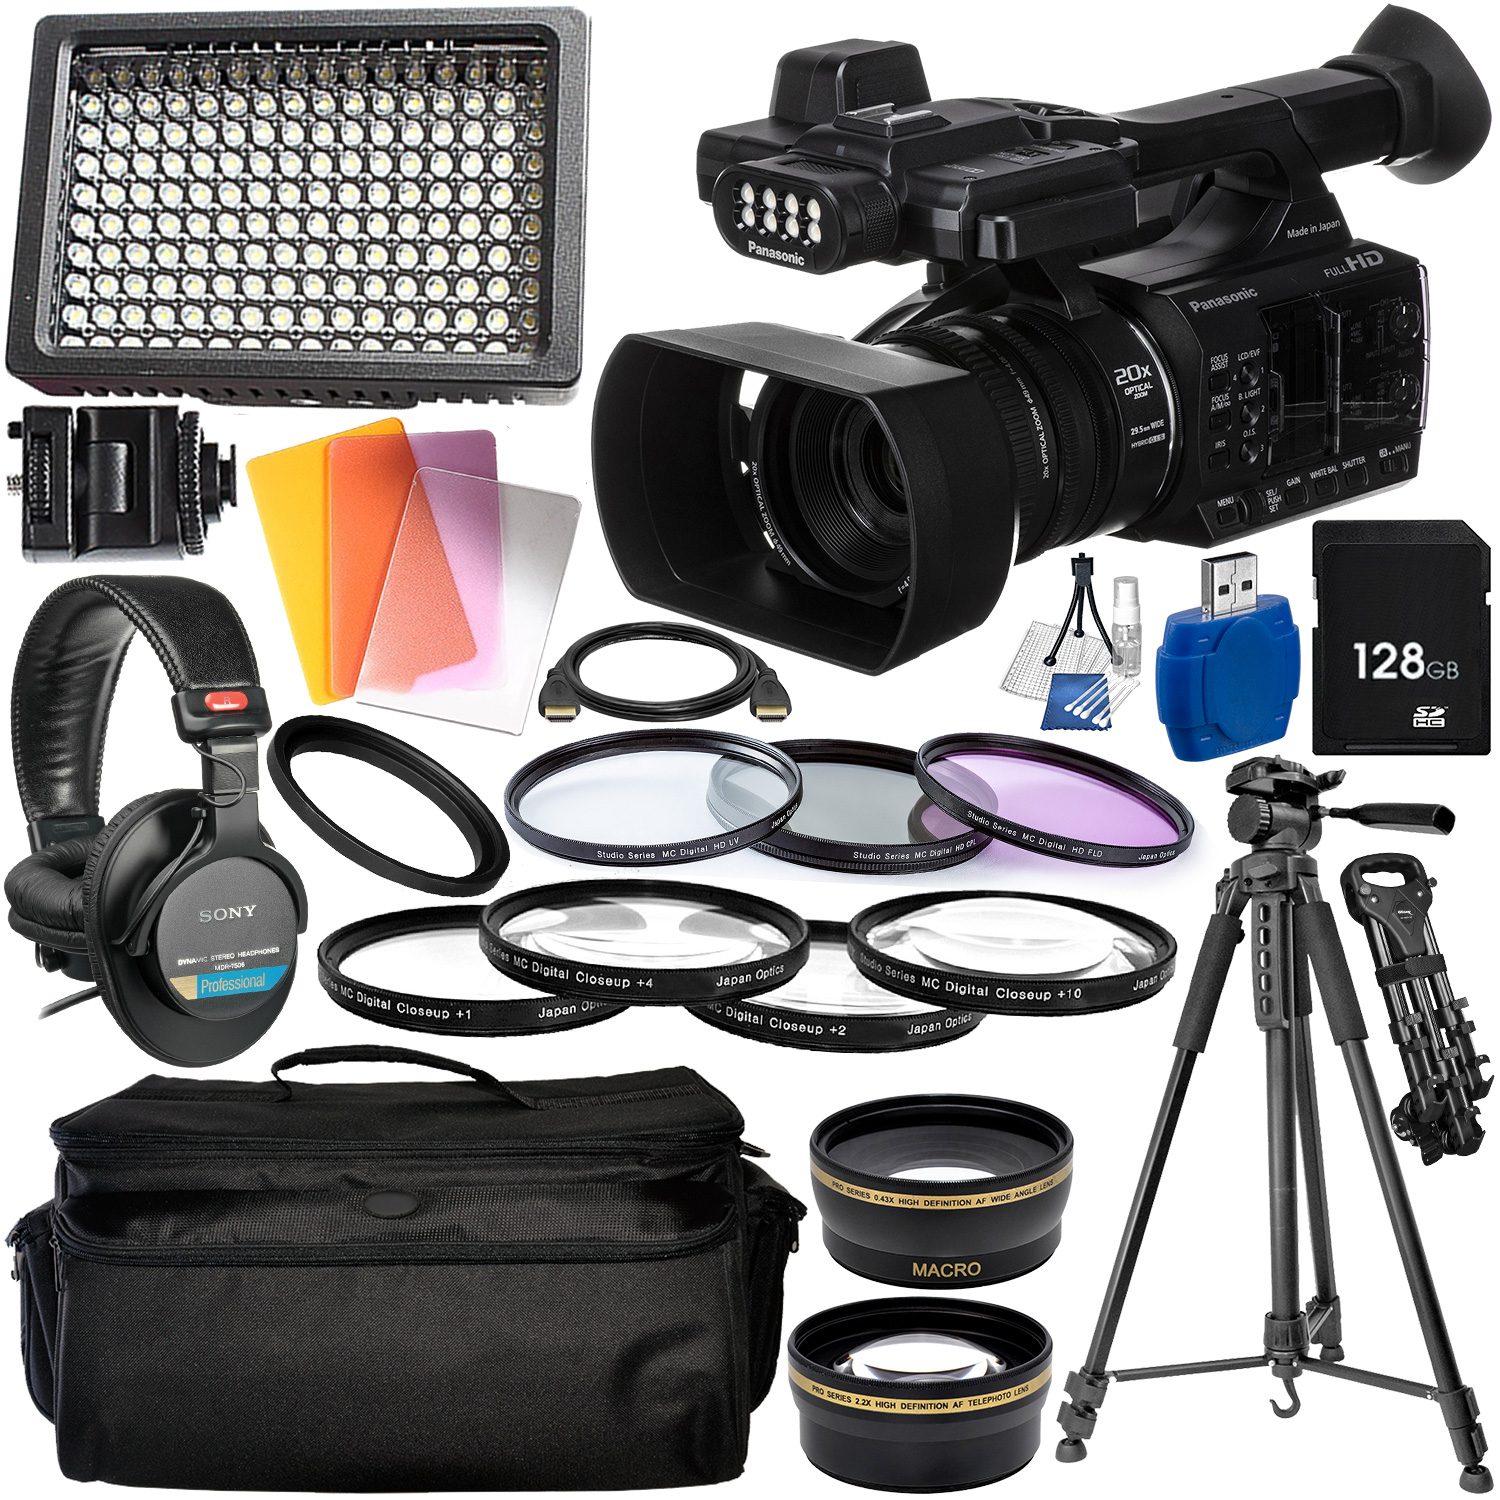 Panasonic AG-AC30 Full HD Camcorder with Built-In LED Light & Essential Accessory Bundle